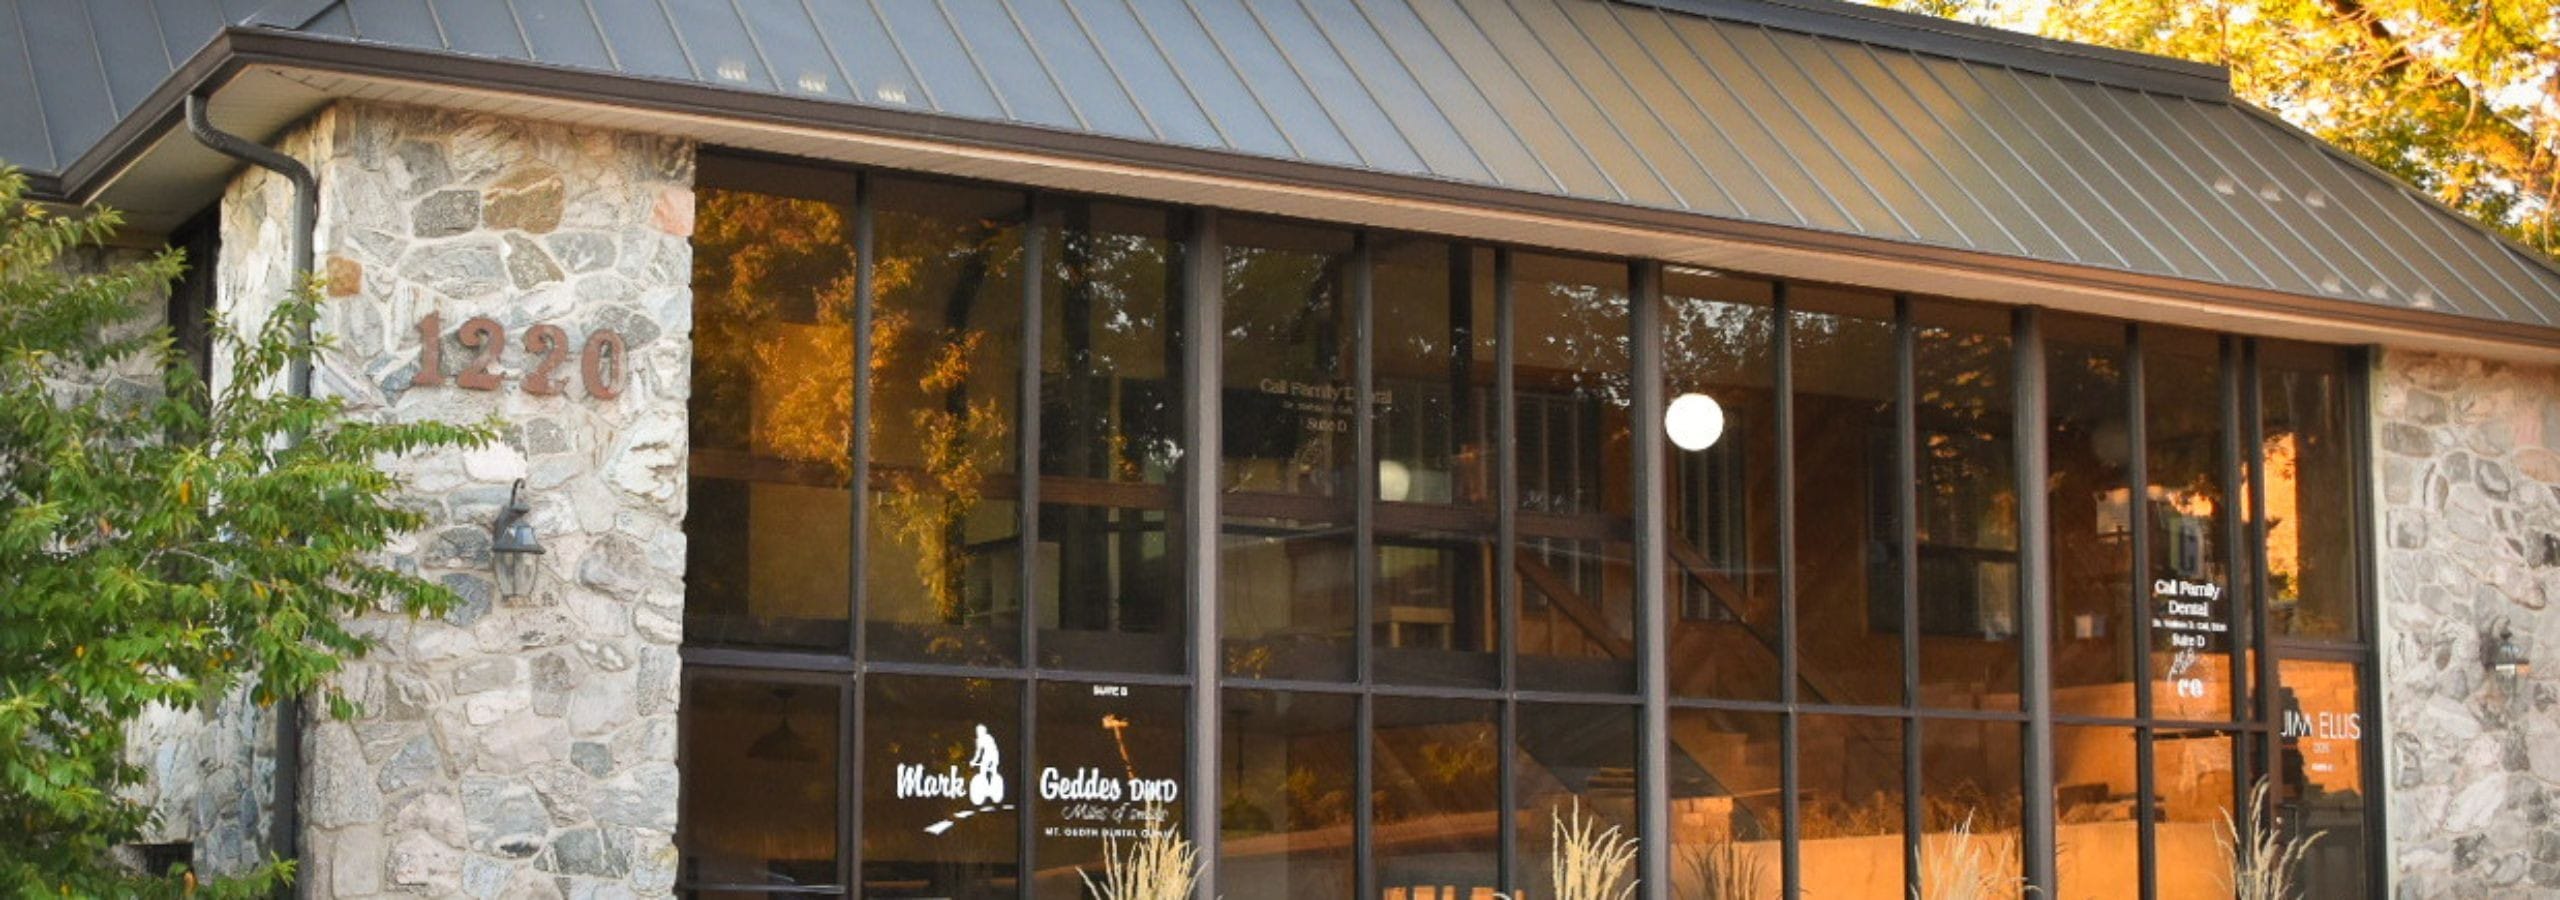 Image of the outside of the dental office for Mt. Ogden Dental & Implant Clinic